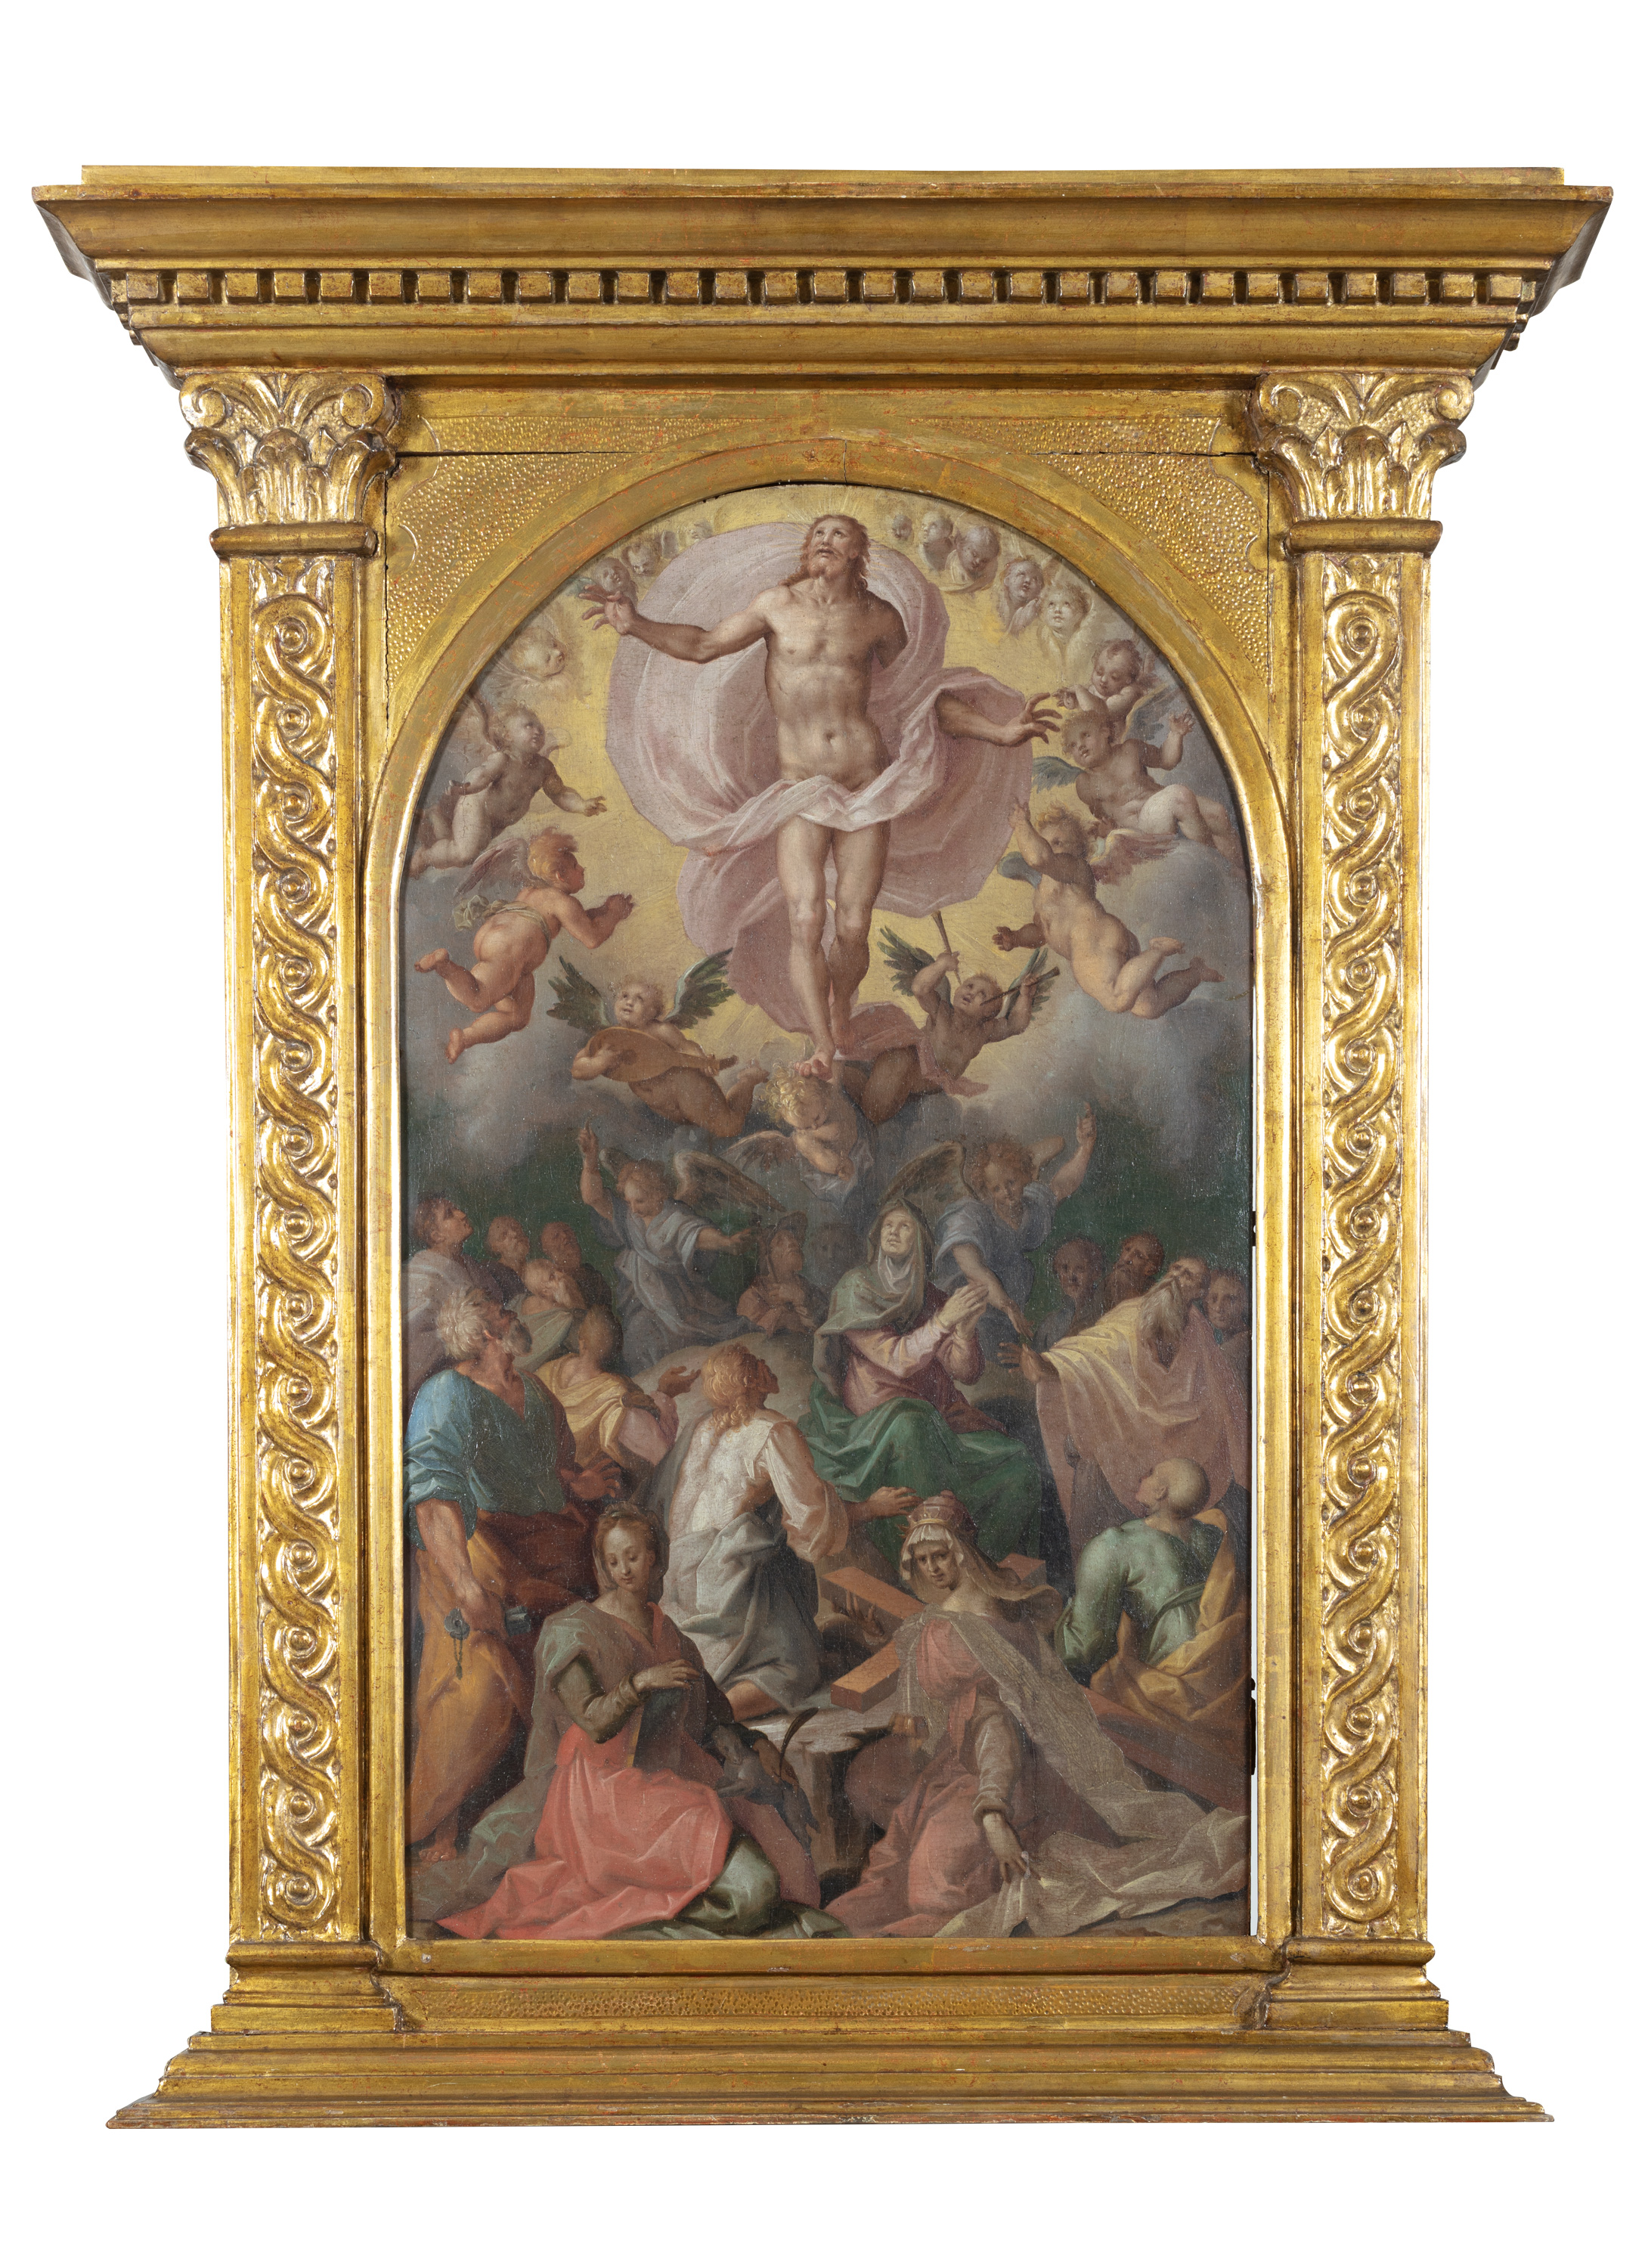 A gem of 16th-century painting joins the Uffizi